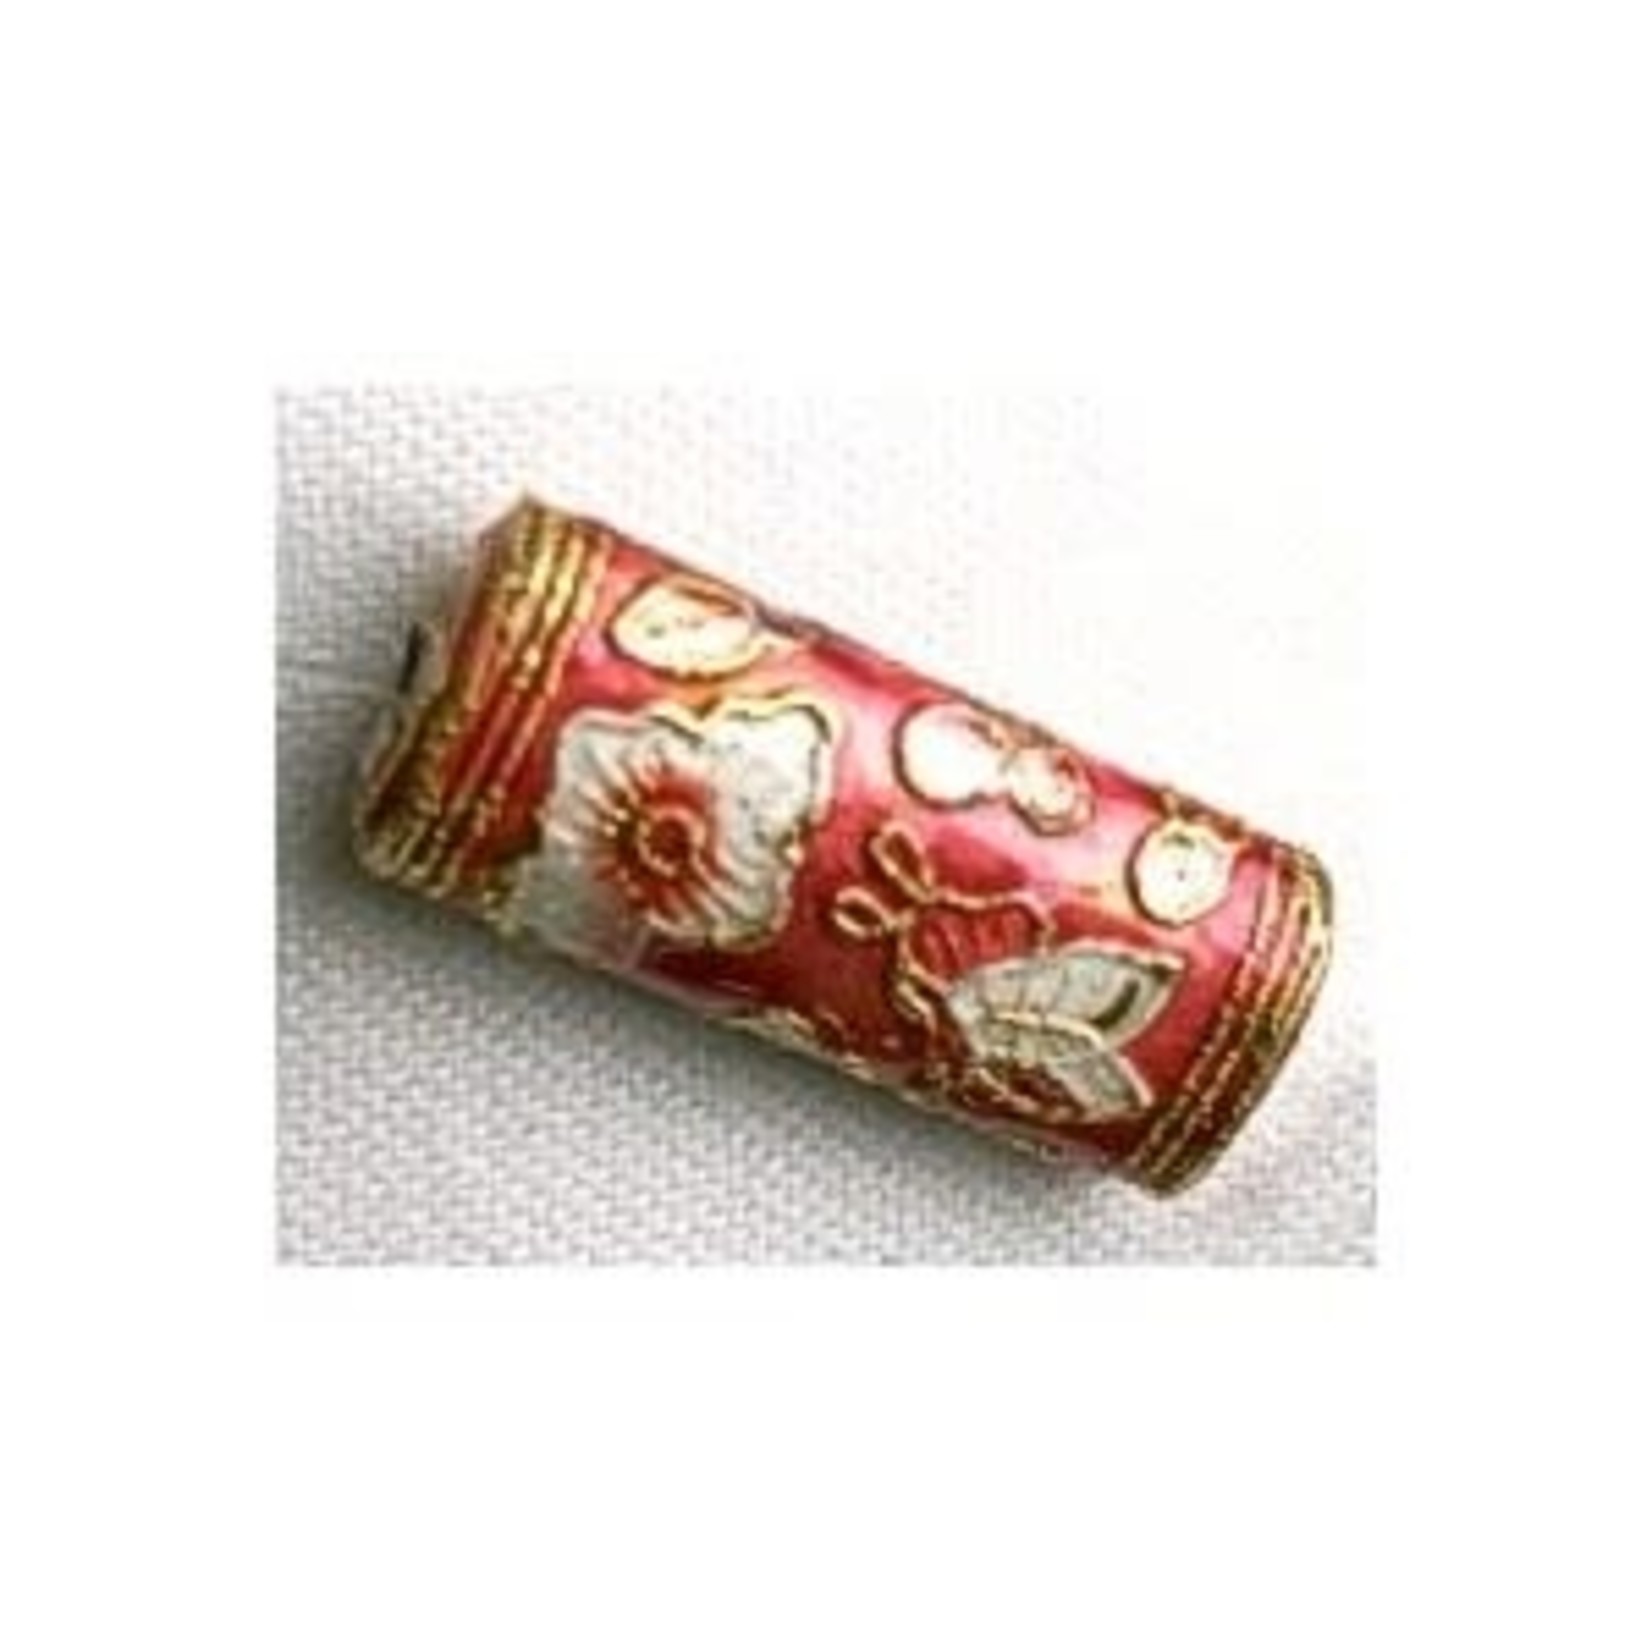 Cloisonne Tube Bead - Red with White Border